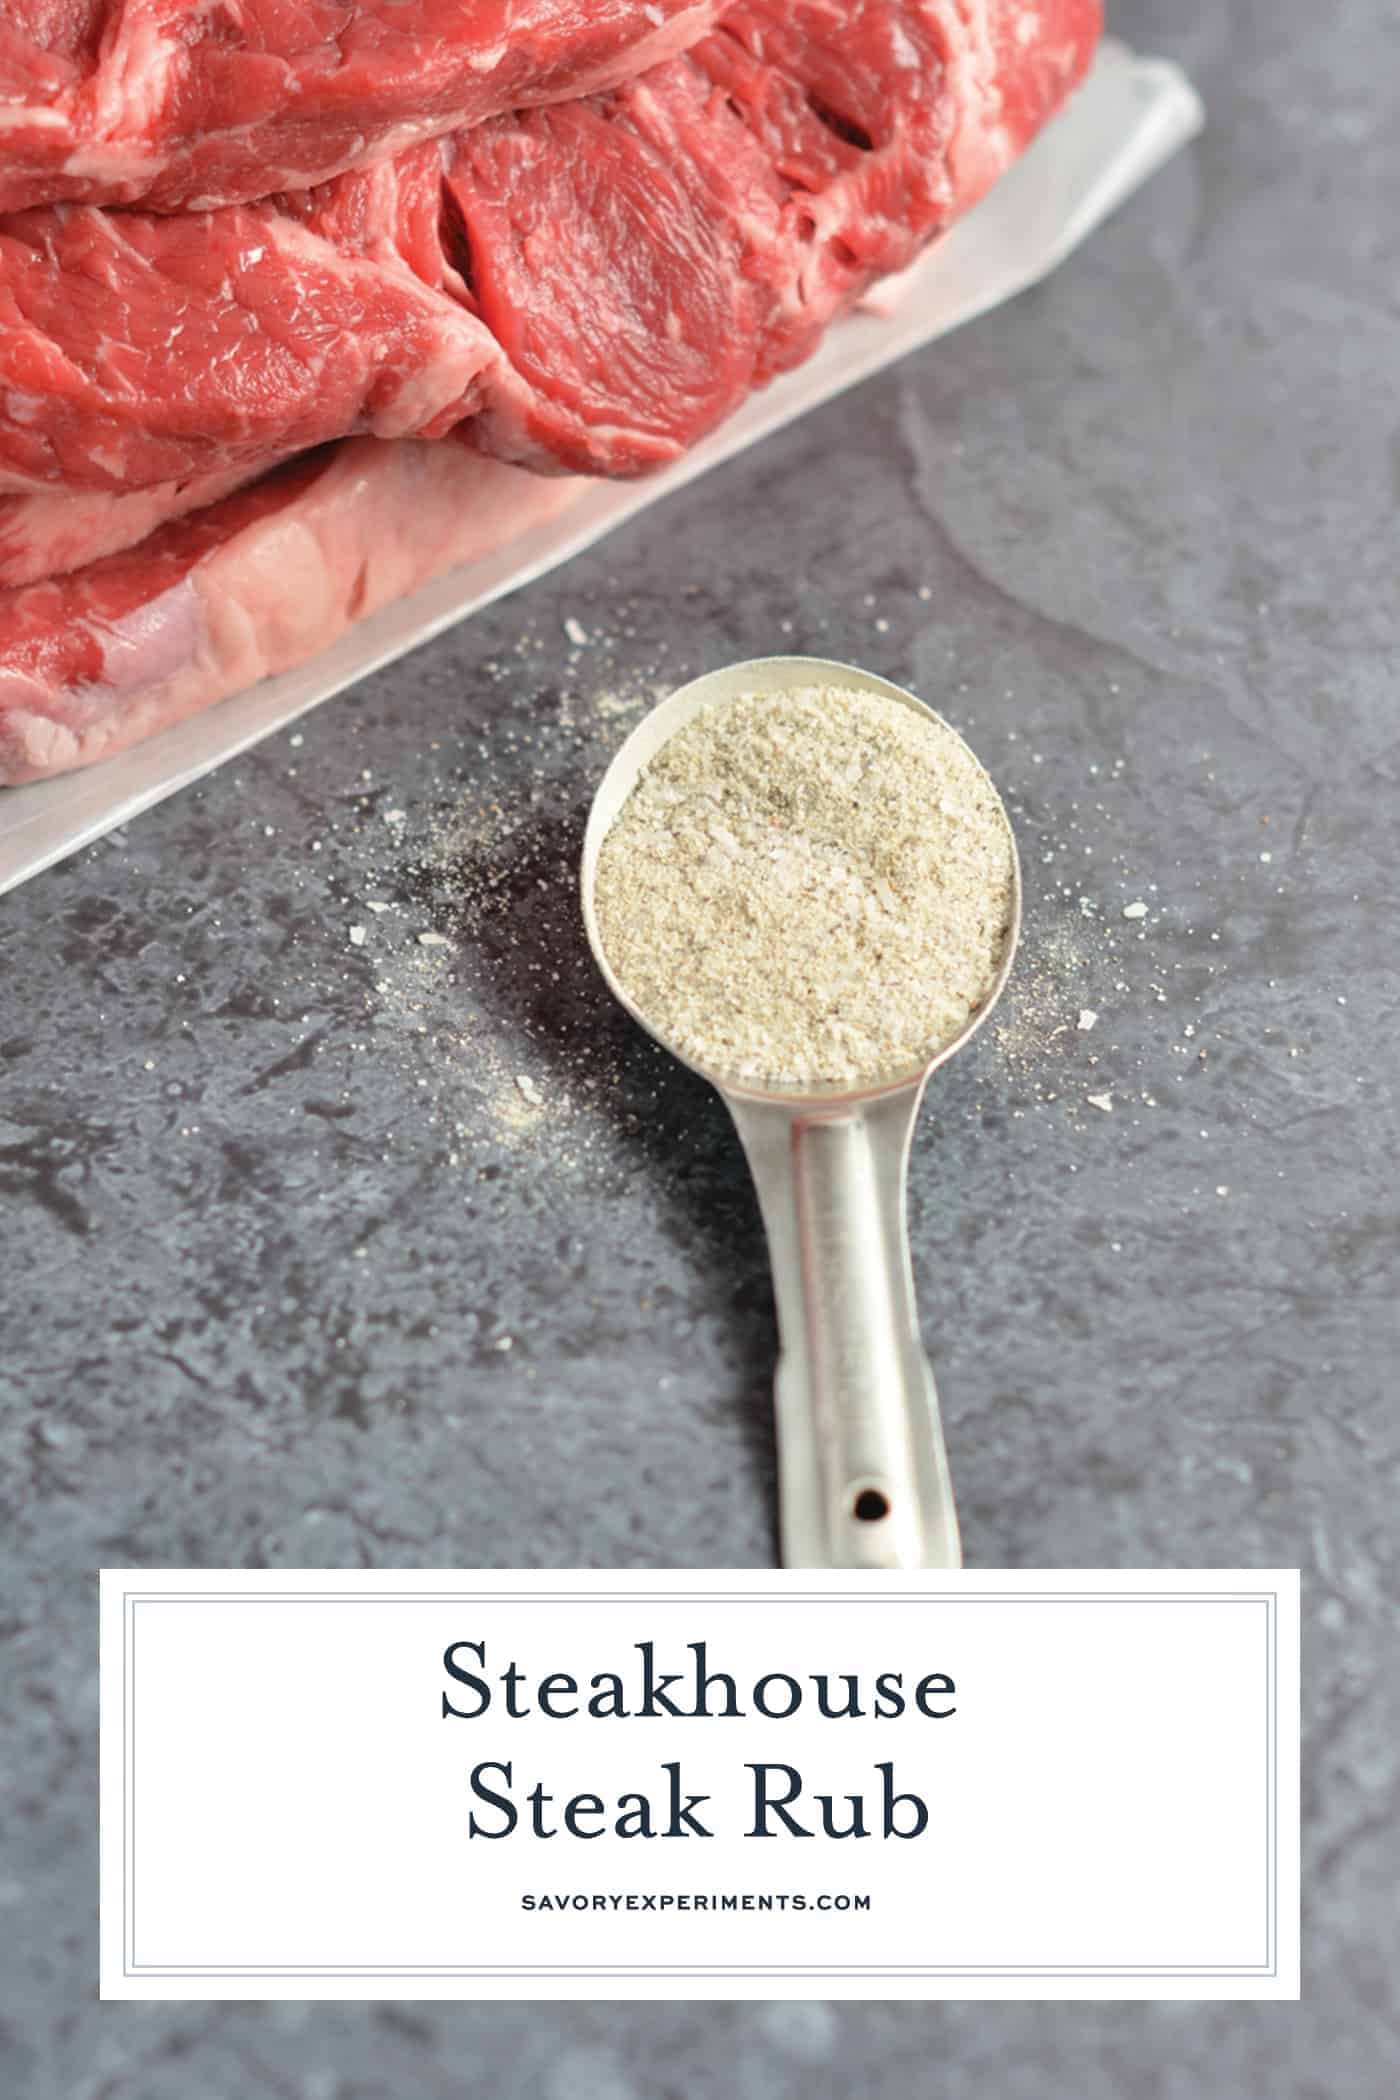 Steakhouse Steak Rub is a secret recipe that I received from a friend at a 5-star steakhouse. You won't beleive how easy it is to make and how delicious your steak will taste! #steakrub #beefseasoning www.savoryexperiments.com